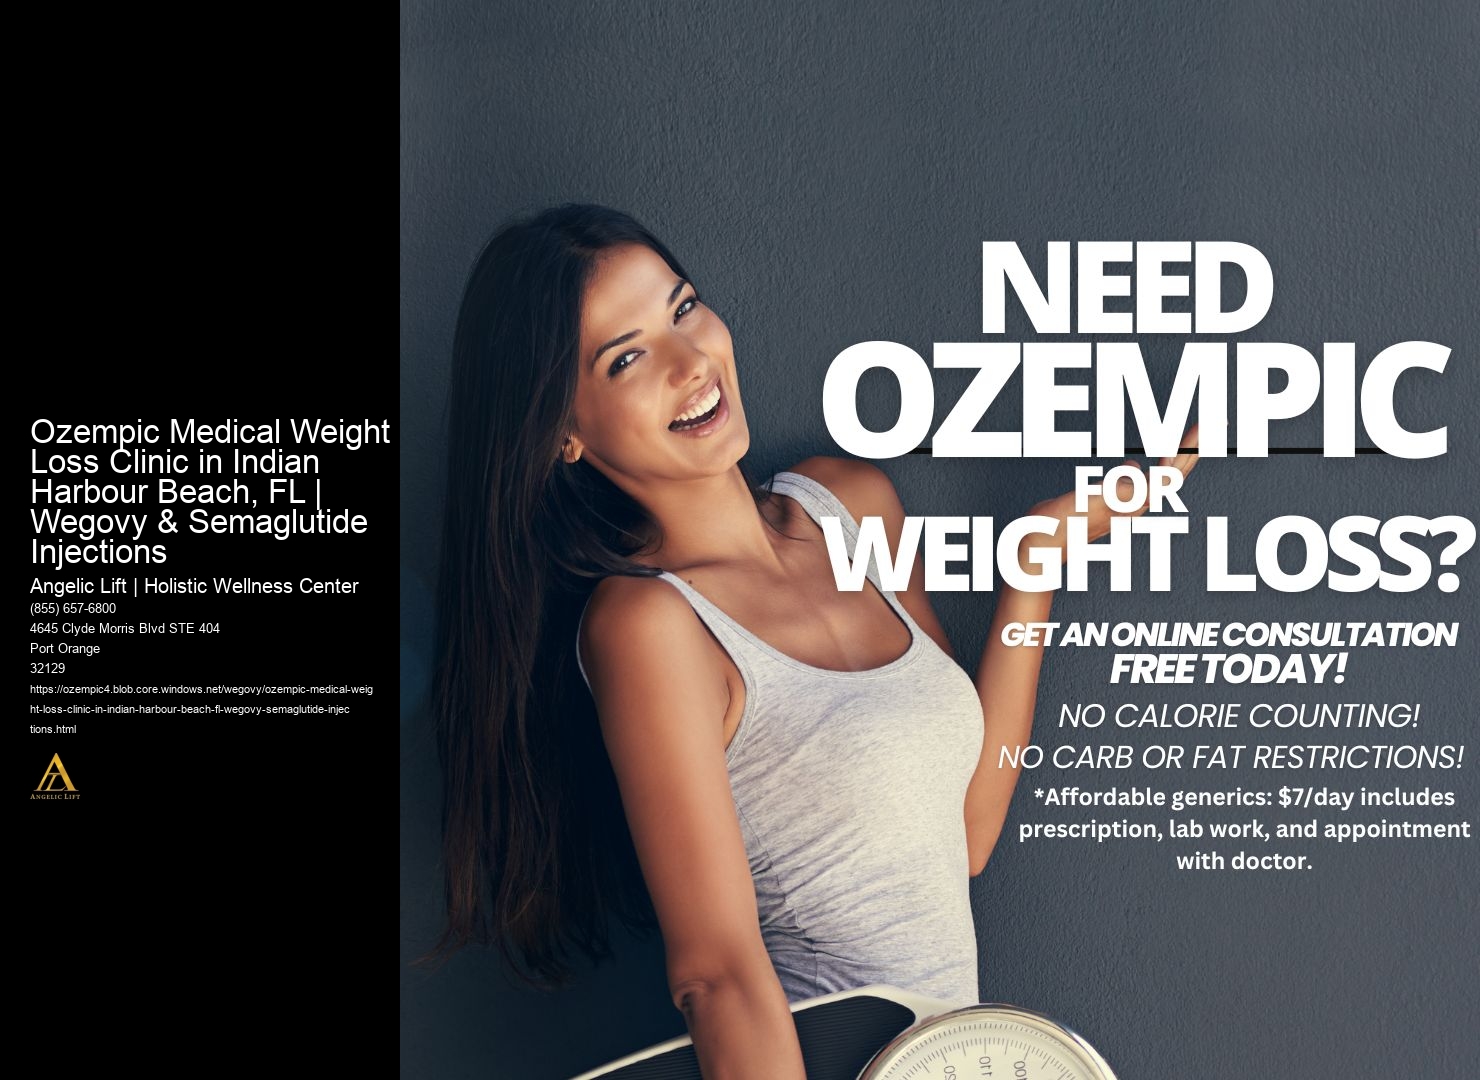 Ozempic Medical Weight Loss Clinic in Indian Harbour Beach, FL | Wegovy & Semaglutide Injections